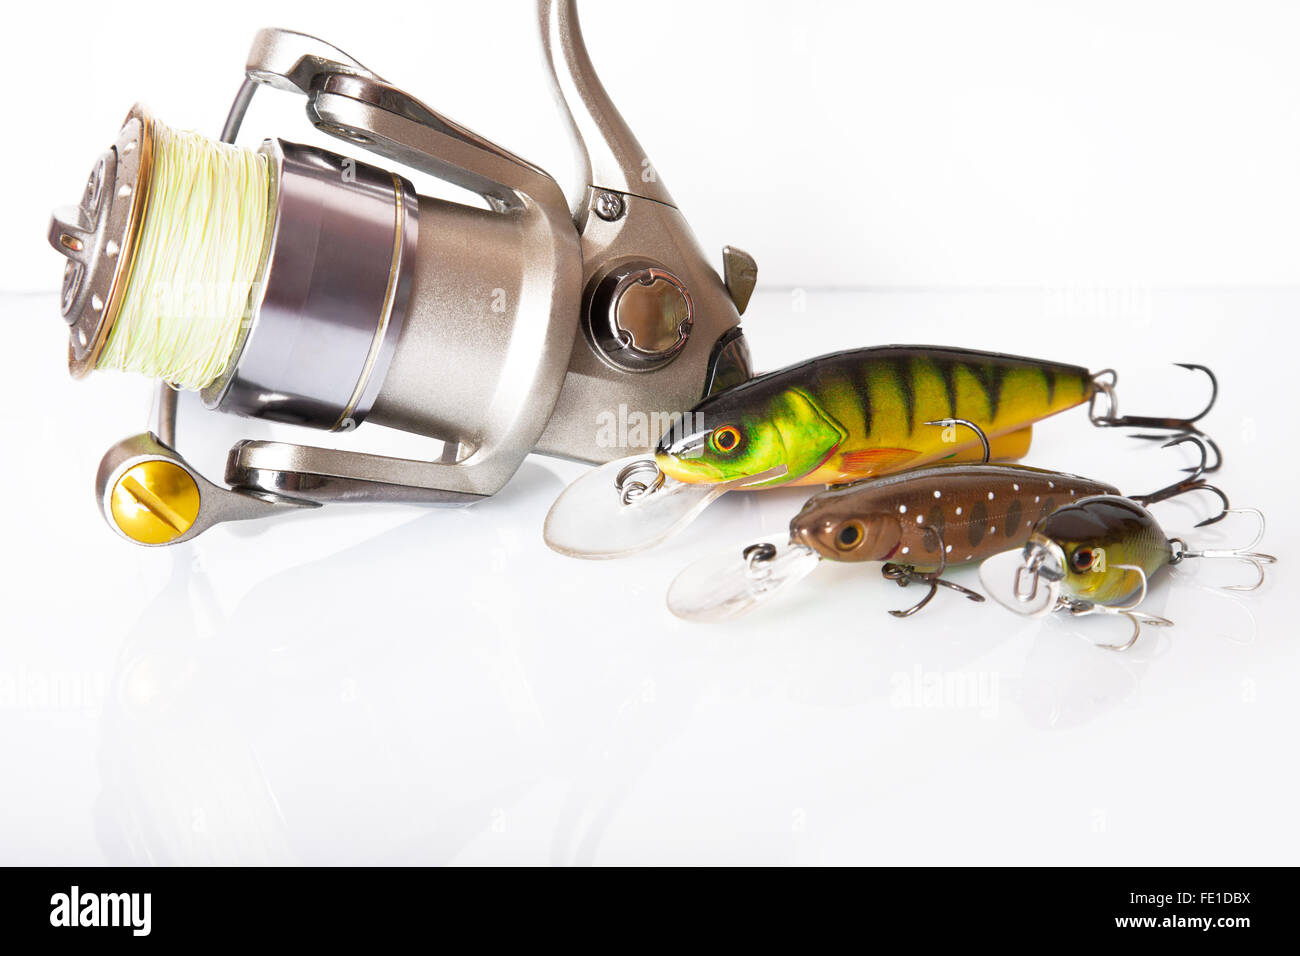 Spinning rod and reel with wobbler lure on white background Stock Photo